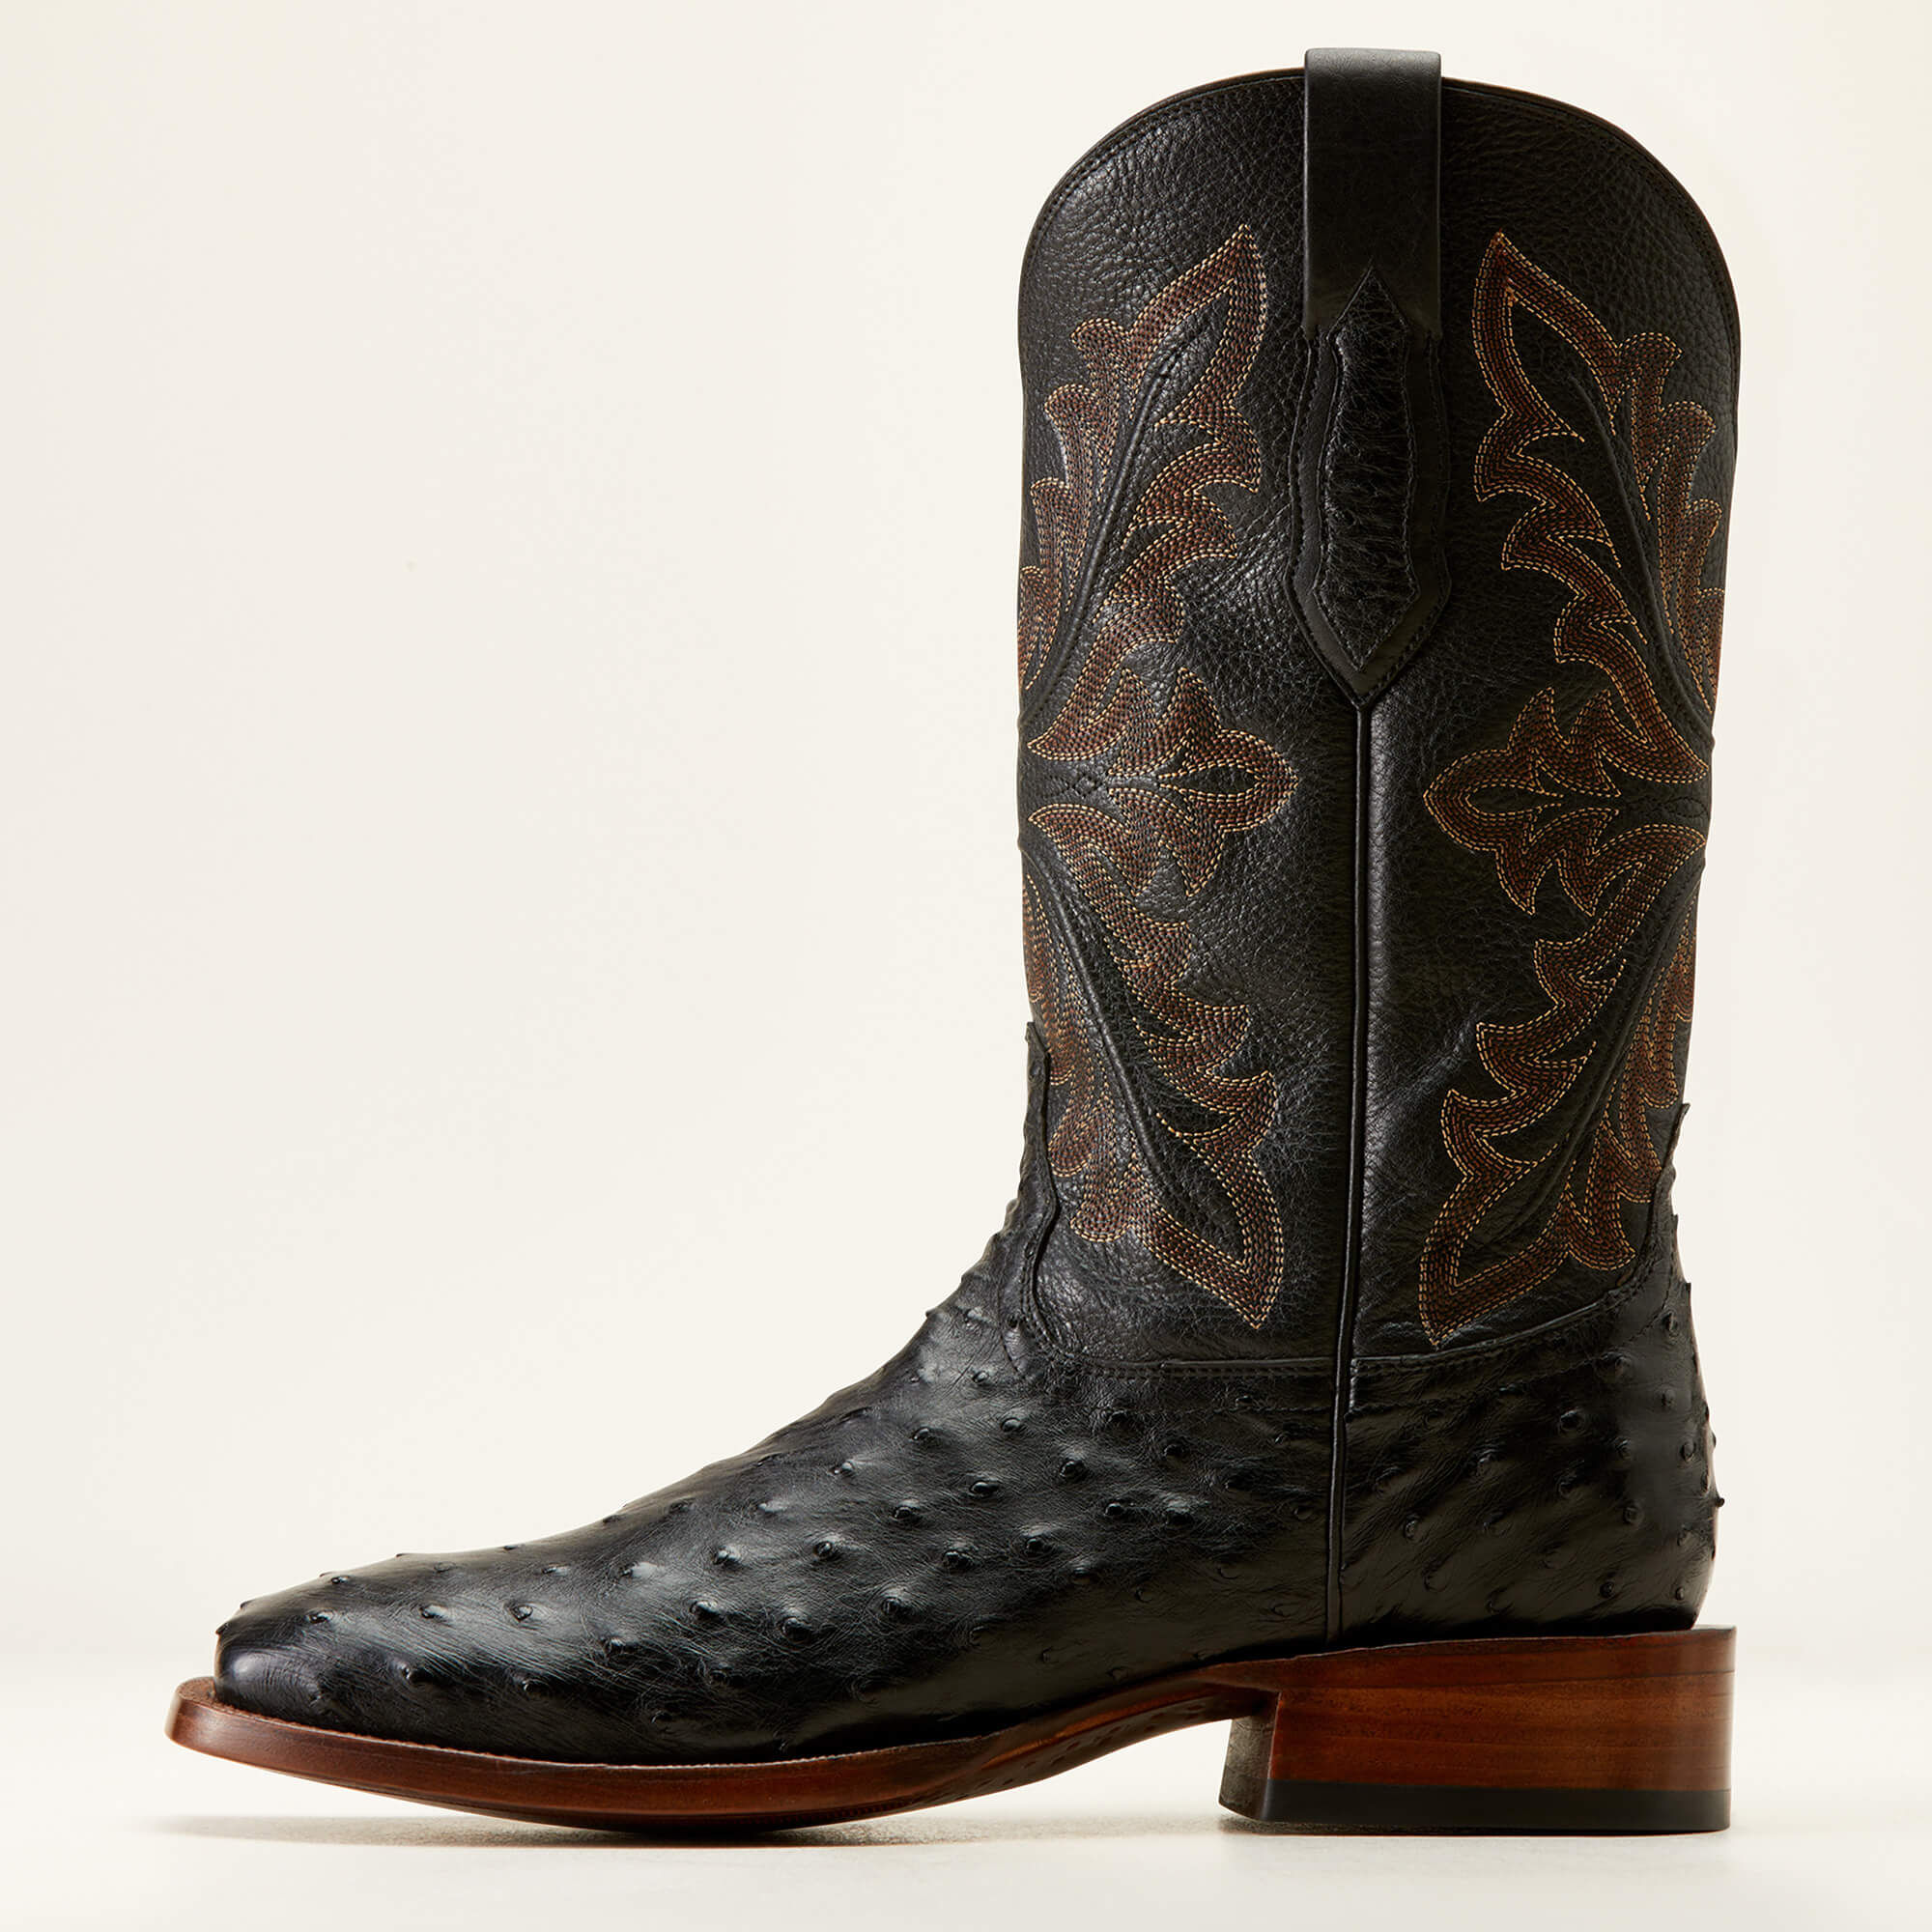 Western Boots for Men | Men's Work Boots & Cowboy Boots | Ariat